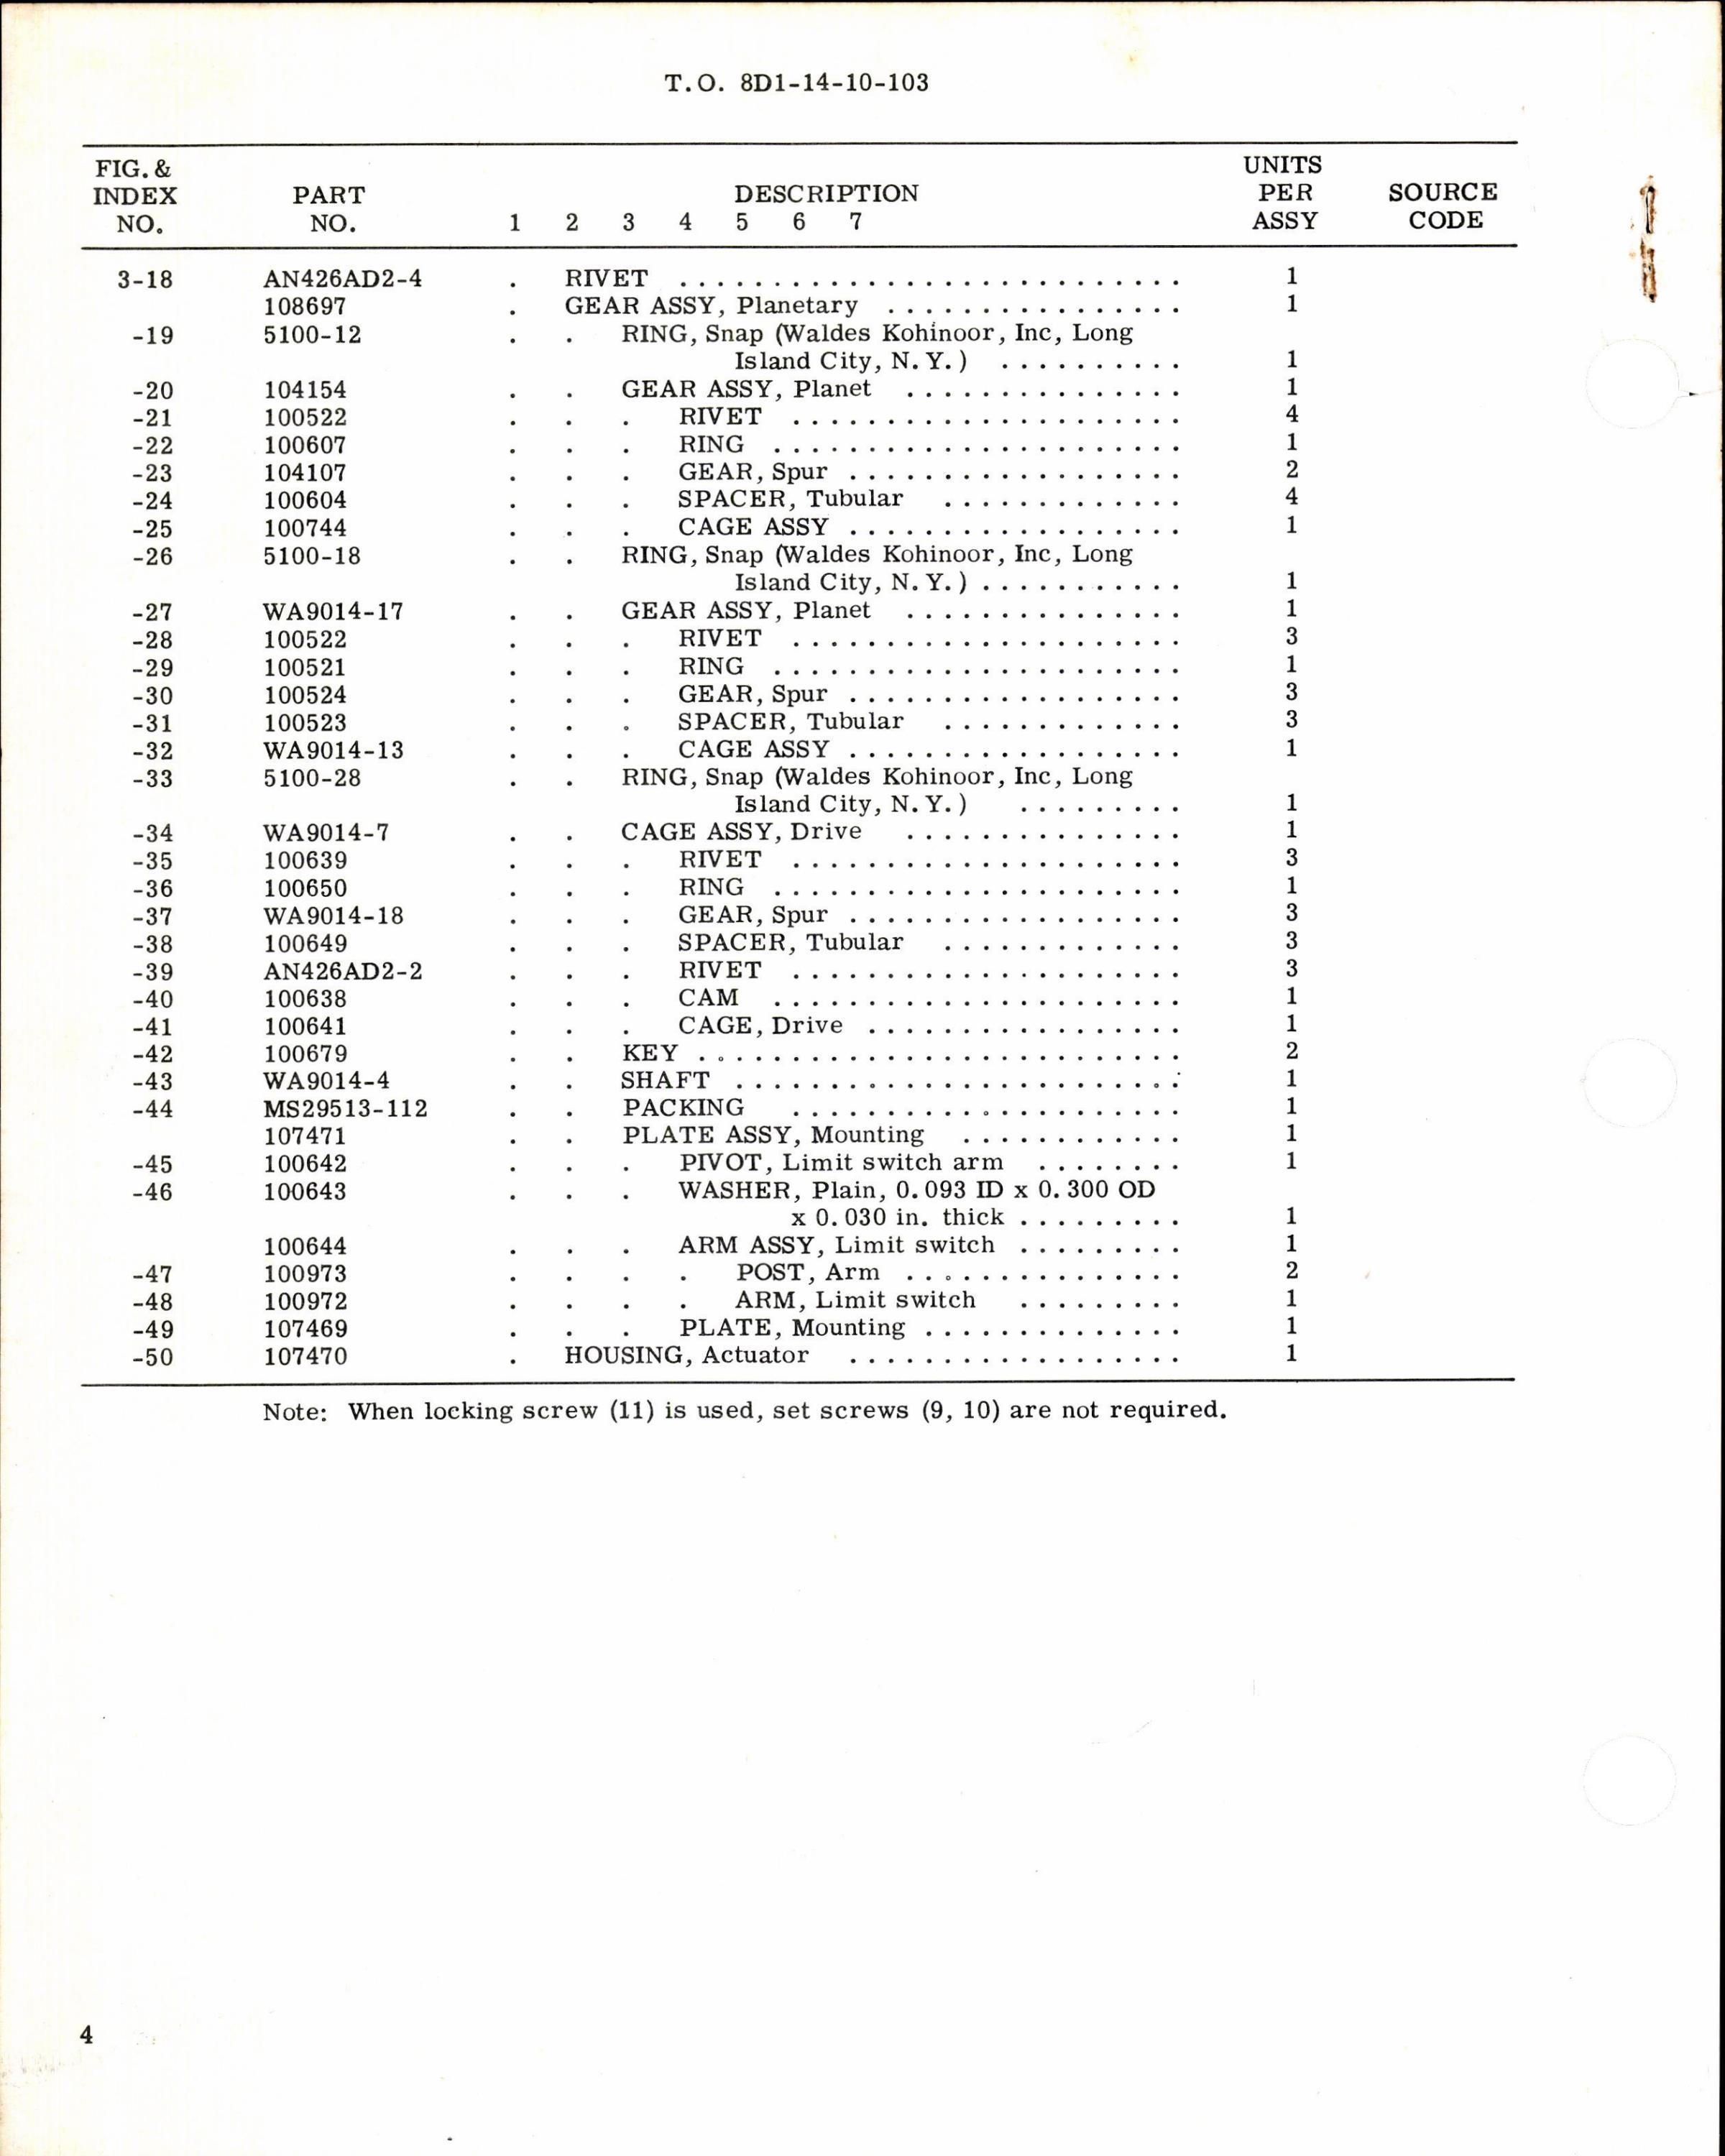 Sample page 4 from AirCorps Library document: Instructions w Parts Breakdown for Actuator Assembly Part 108372